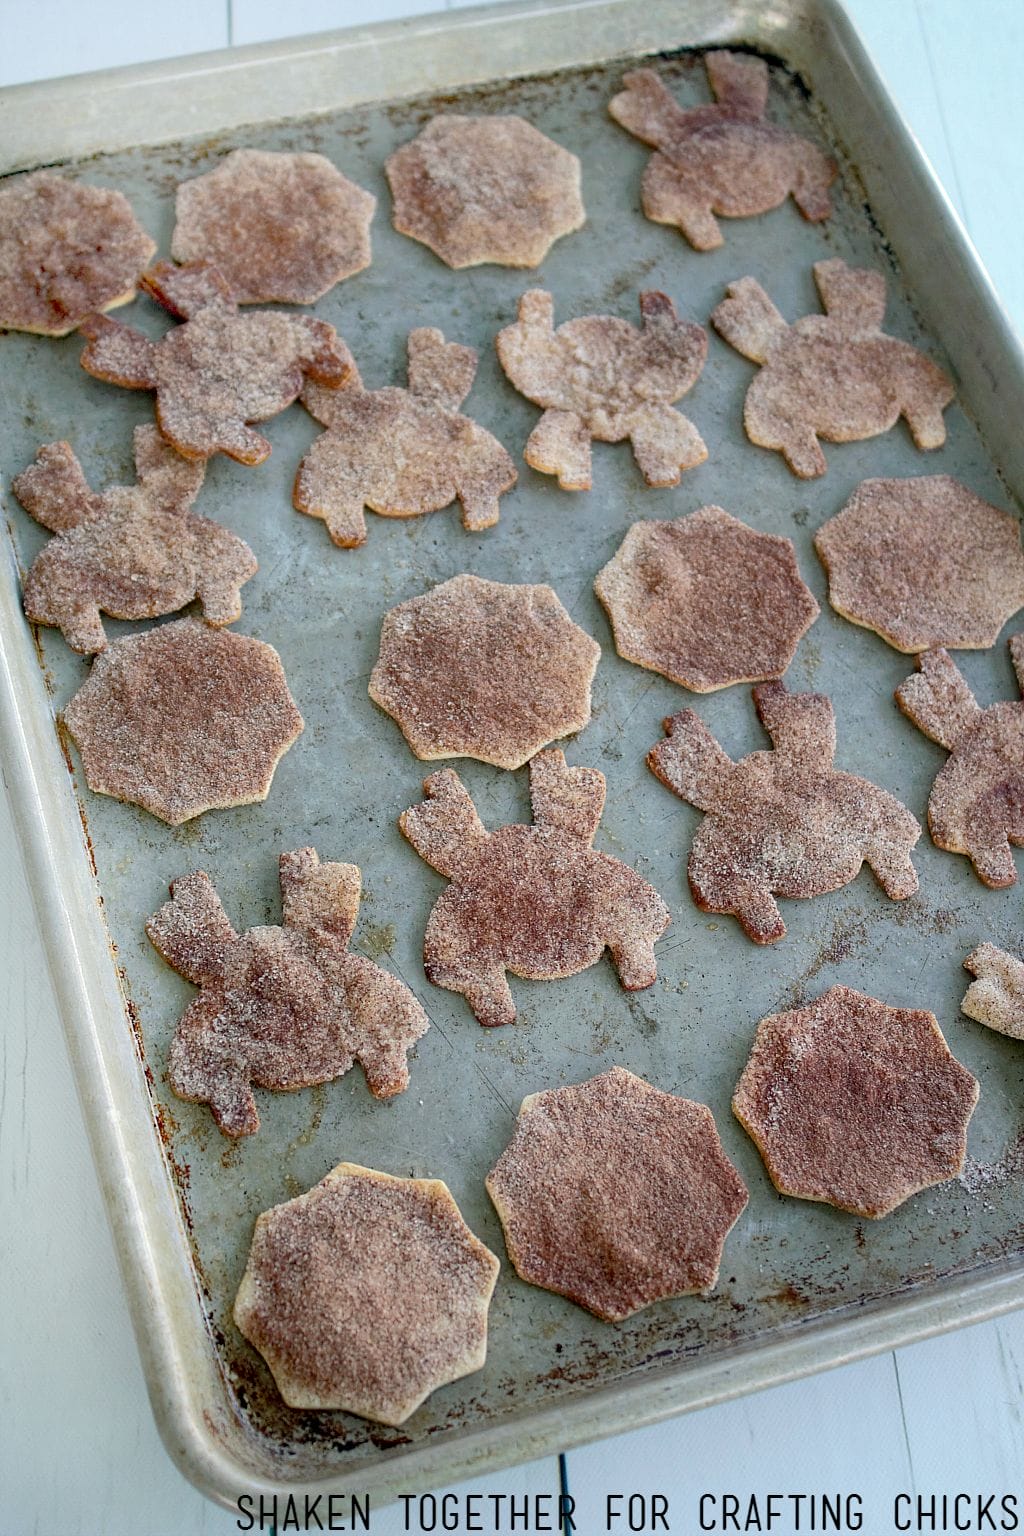 Cinnamon Sugar Spider Chips are baked up with a generous sprinkle of cinnamon sugar!